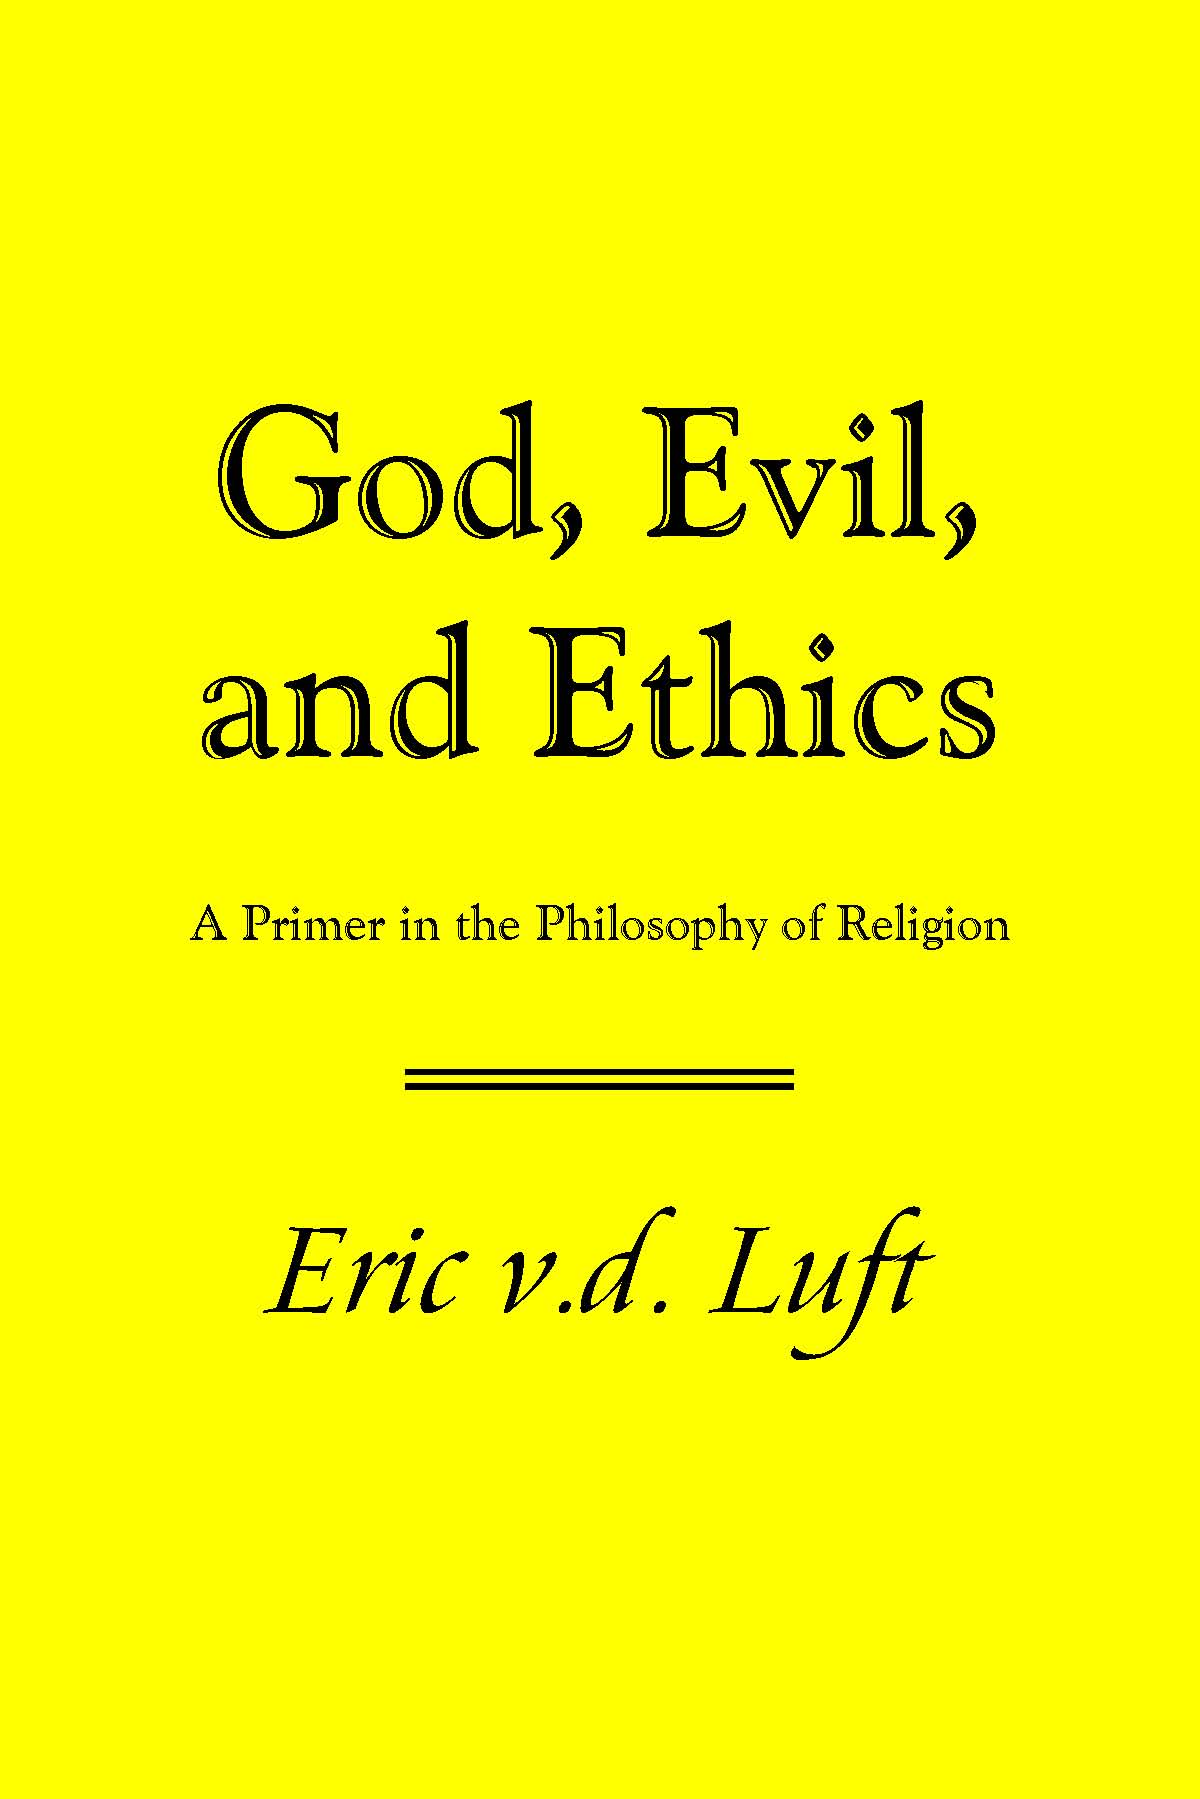 God, Evil, and Ethics: A Primer in the Philosophy of Religion by Eric v.d. Luft